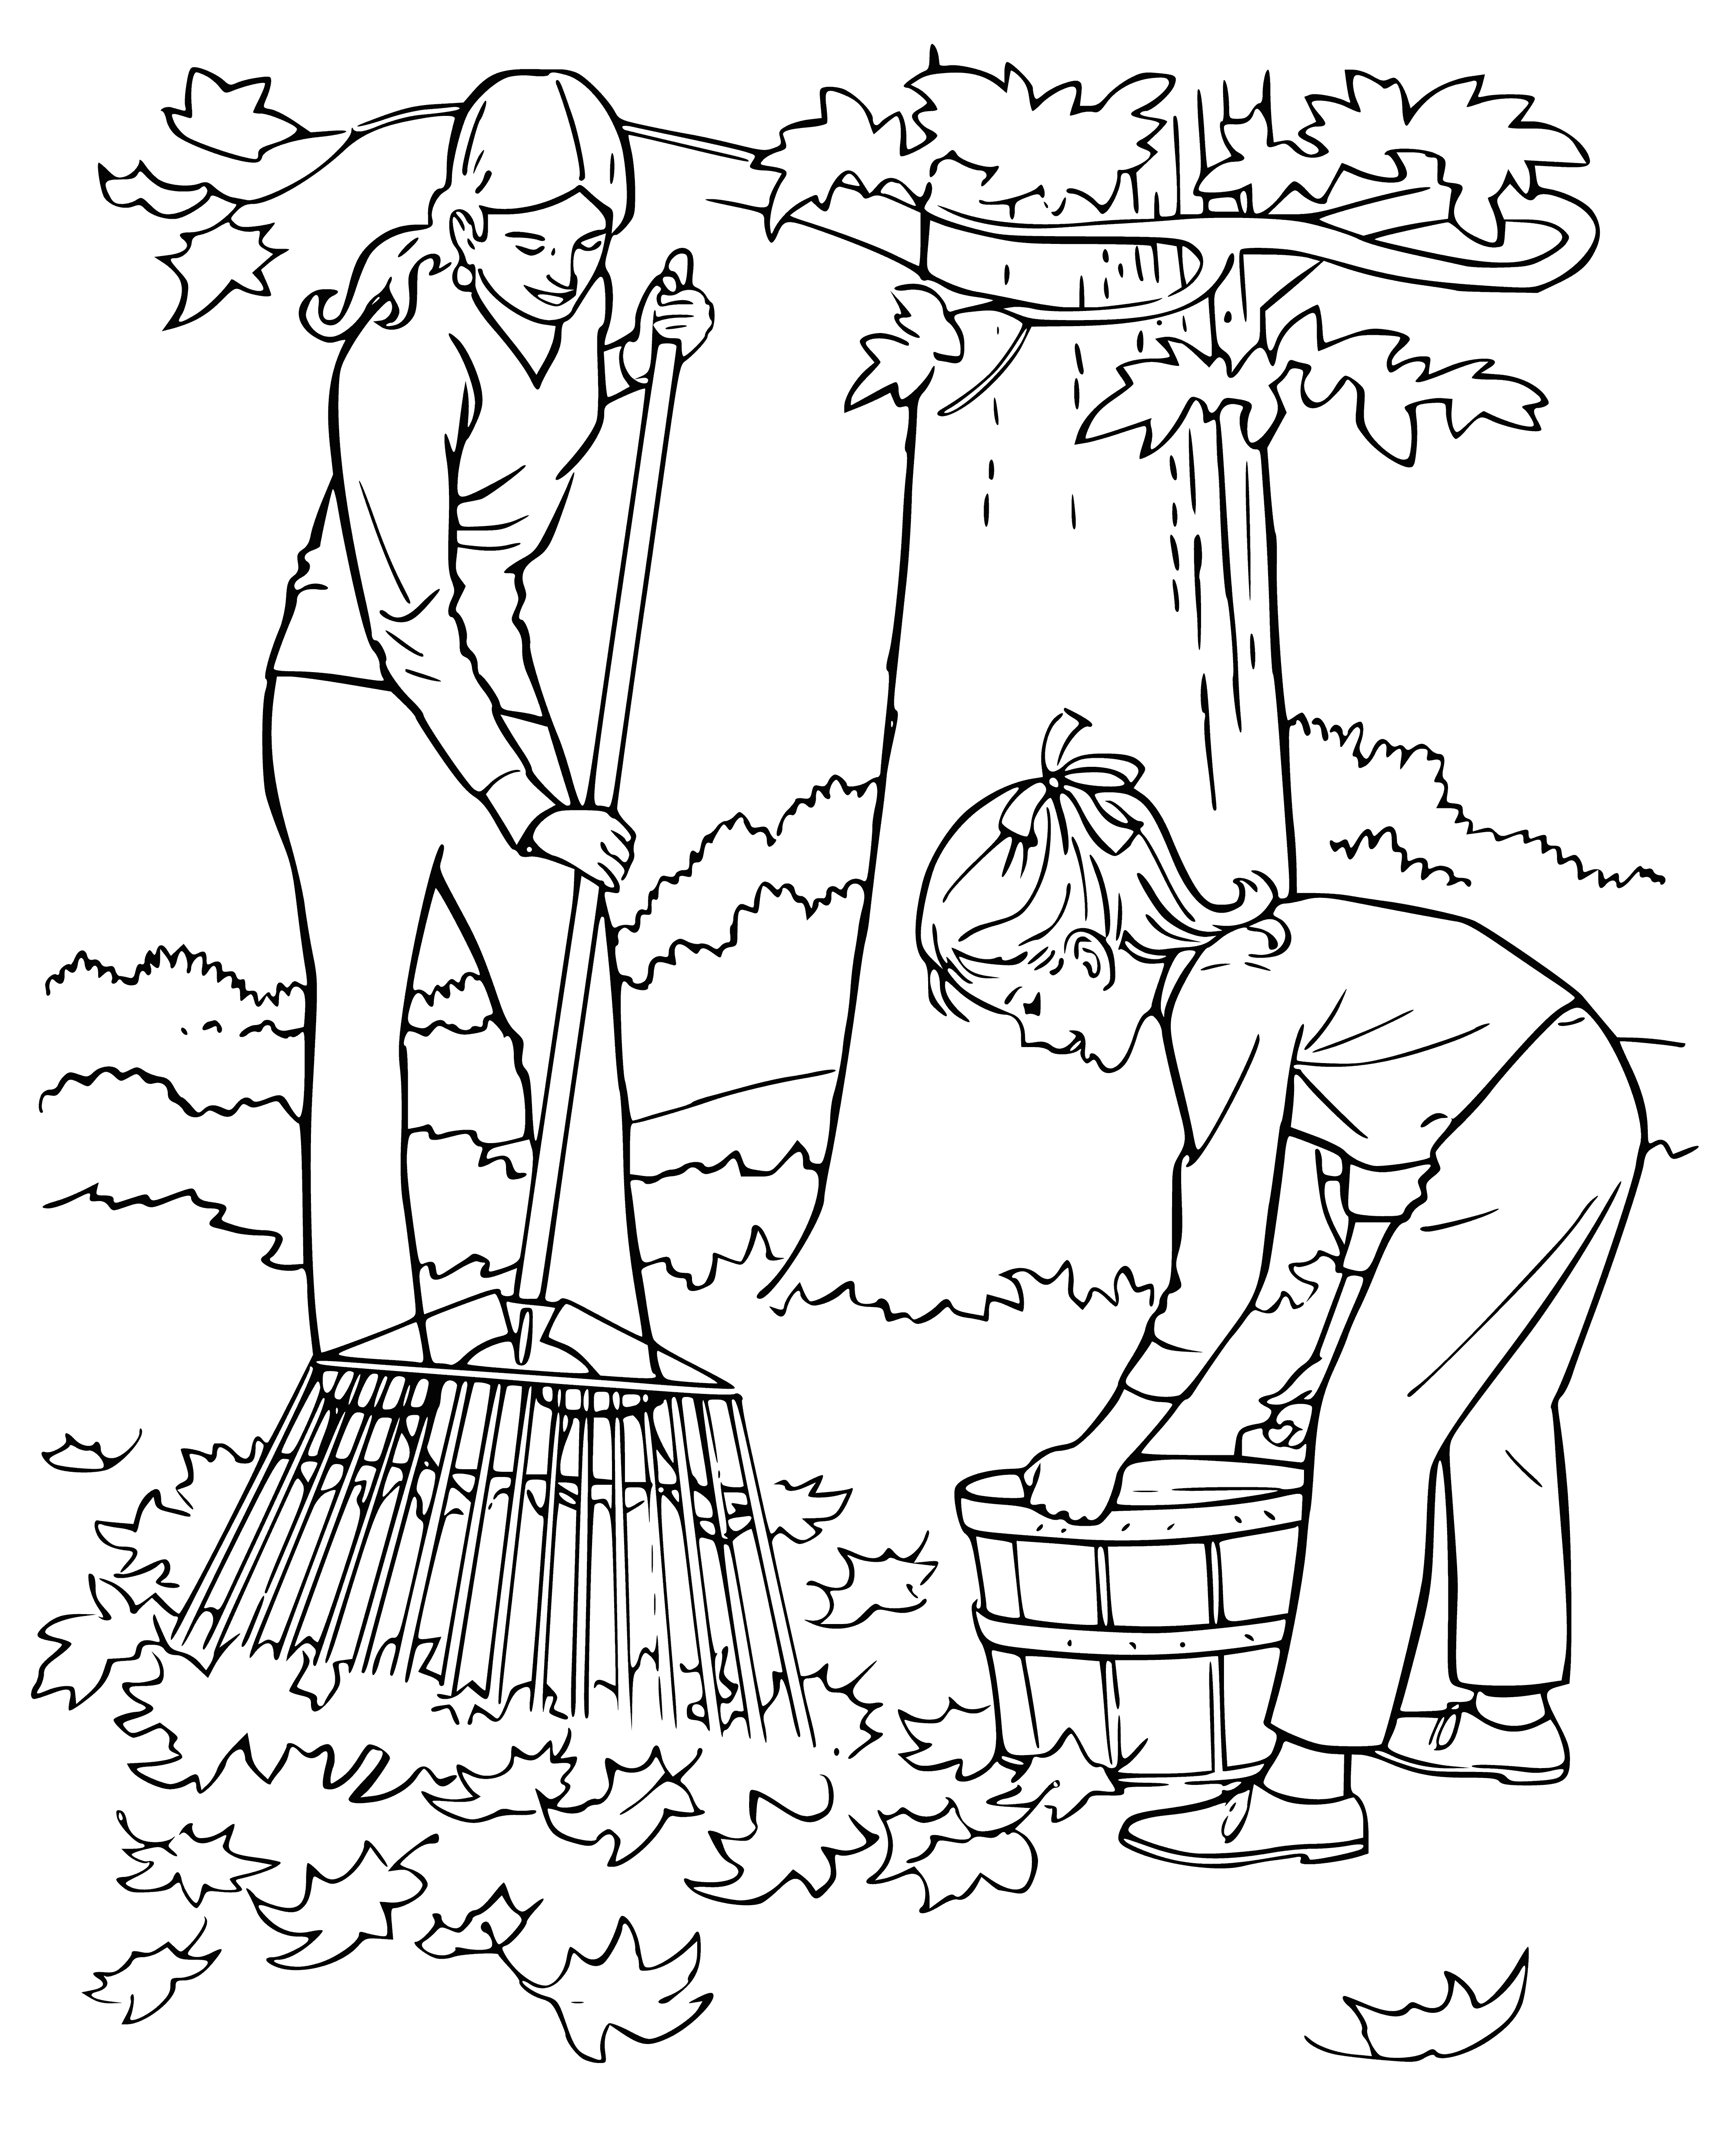 coloring page: Leaves falling, must clean to avoid rot.